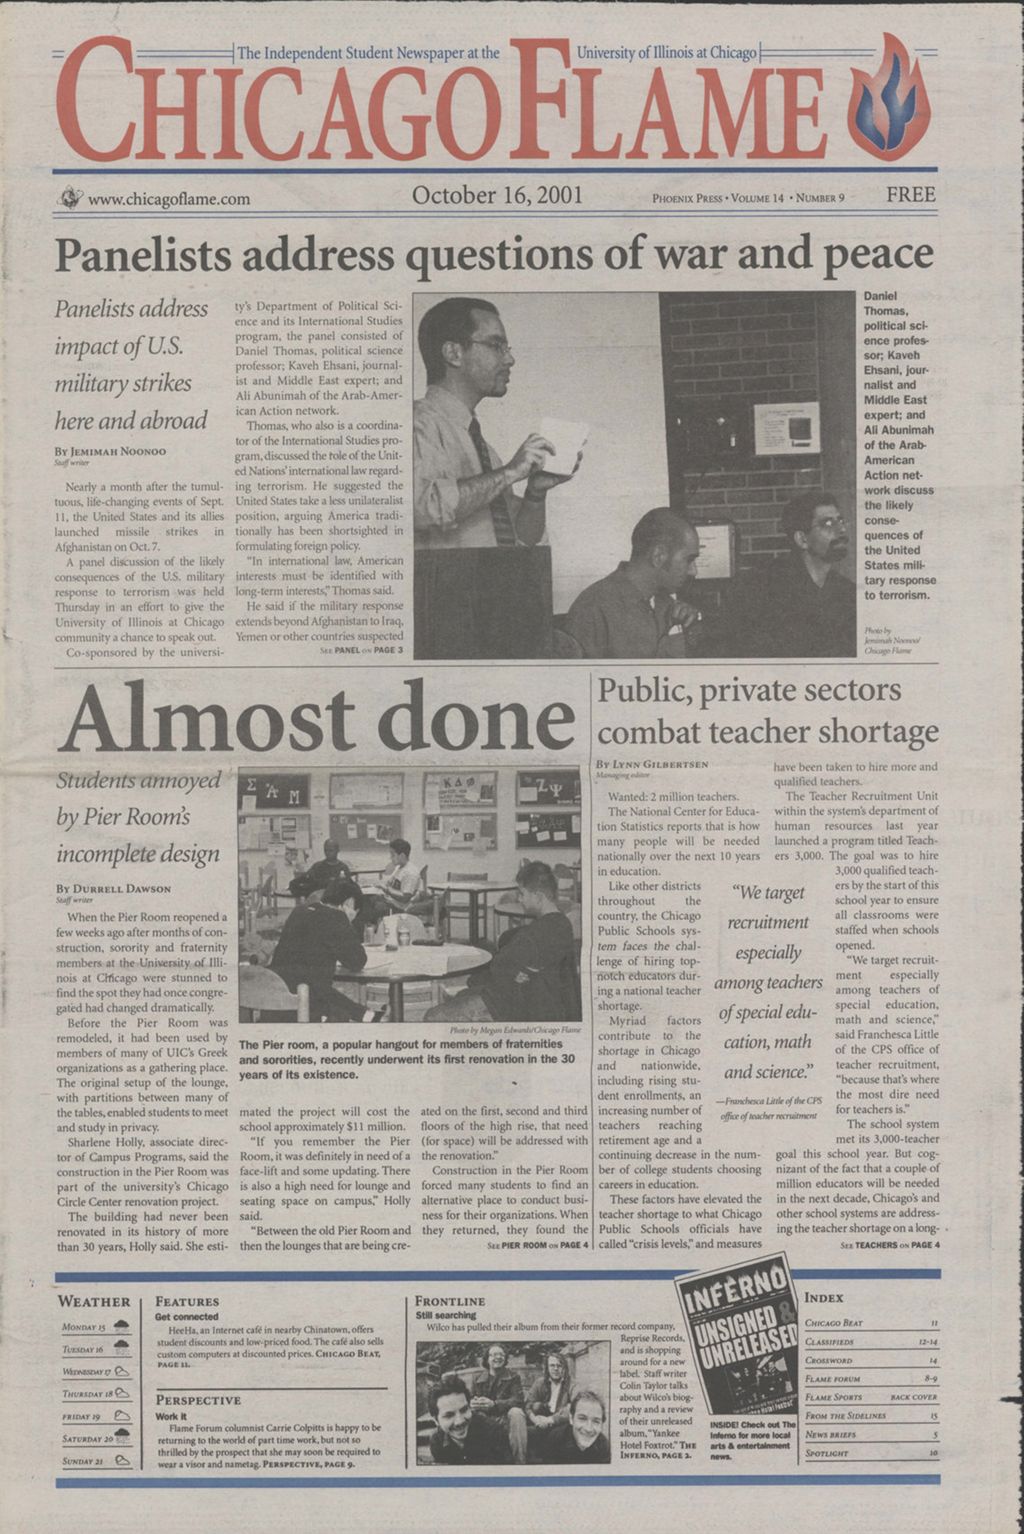 Miniature of Chicago Flame (October 16, 2001)